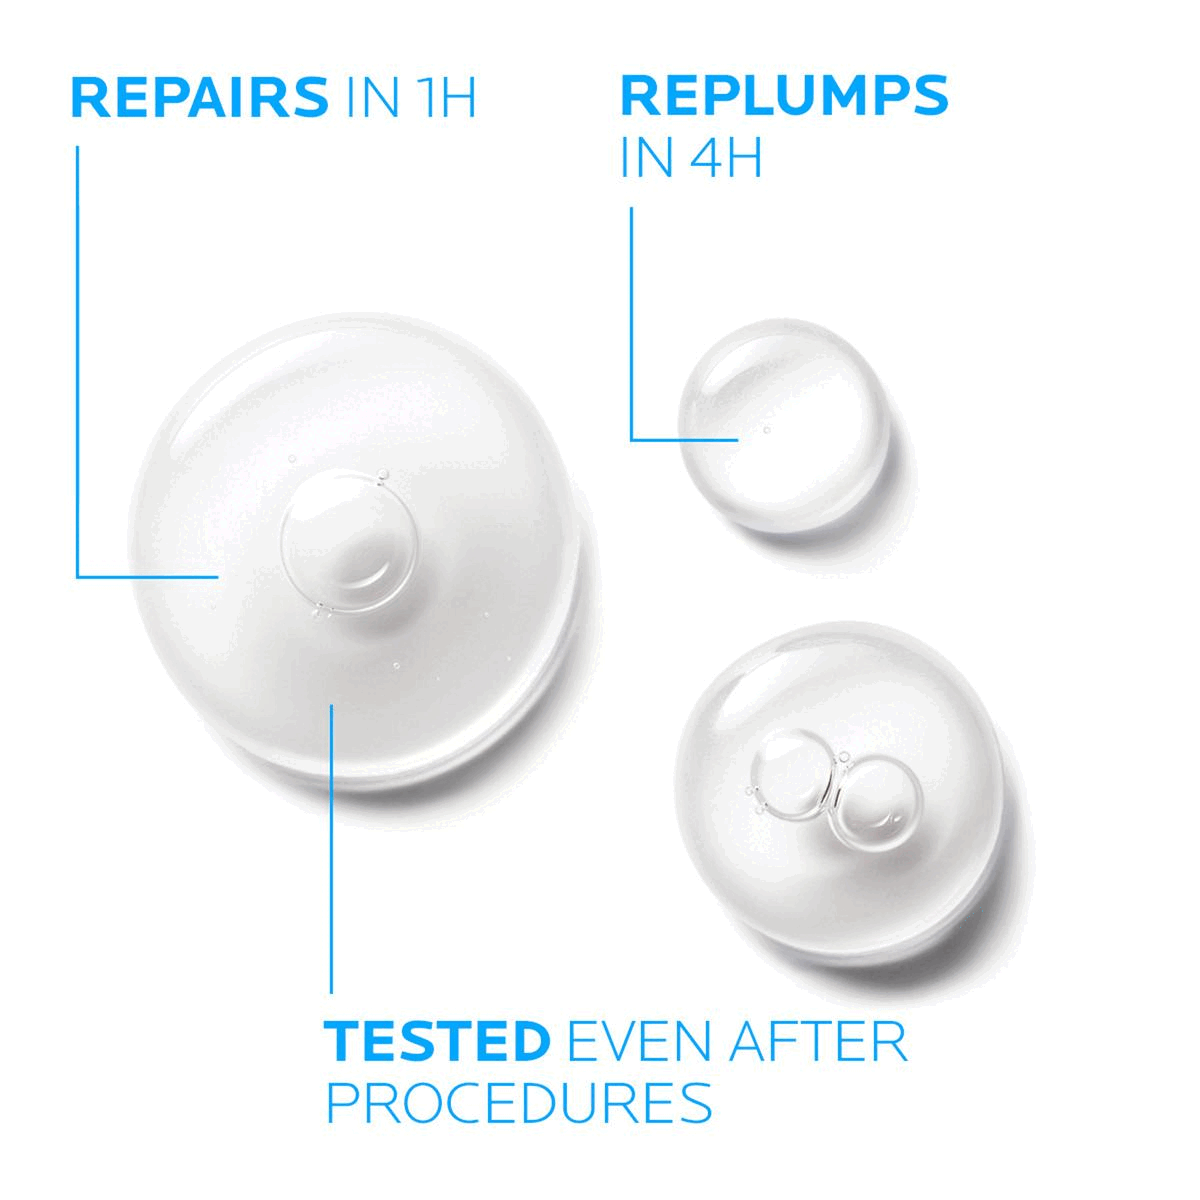 Image 1 - Repairs in 1H. Replumps in 4H. Tested even after procedures. Image 2 - DUO OF HYALURONIC ACID. Hyaluronic acid effectively plumps the skin and in doing so, reduces the appearance of fine lines and wrinkles, as well as improving skin hydration and texture. VITAMIN B5. Helps improve the skin's natural repairing process and helps stimulate repair of damaged skin.Image 3 - No.1 dermatologist recommended dermacosmetic brand worldwide.